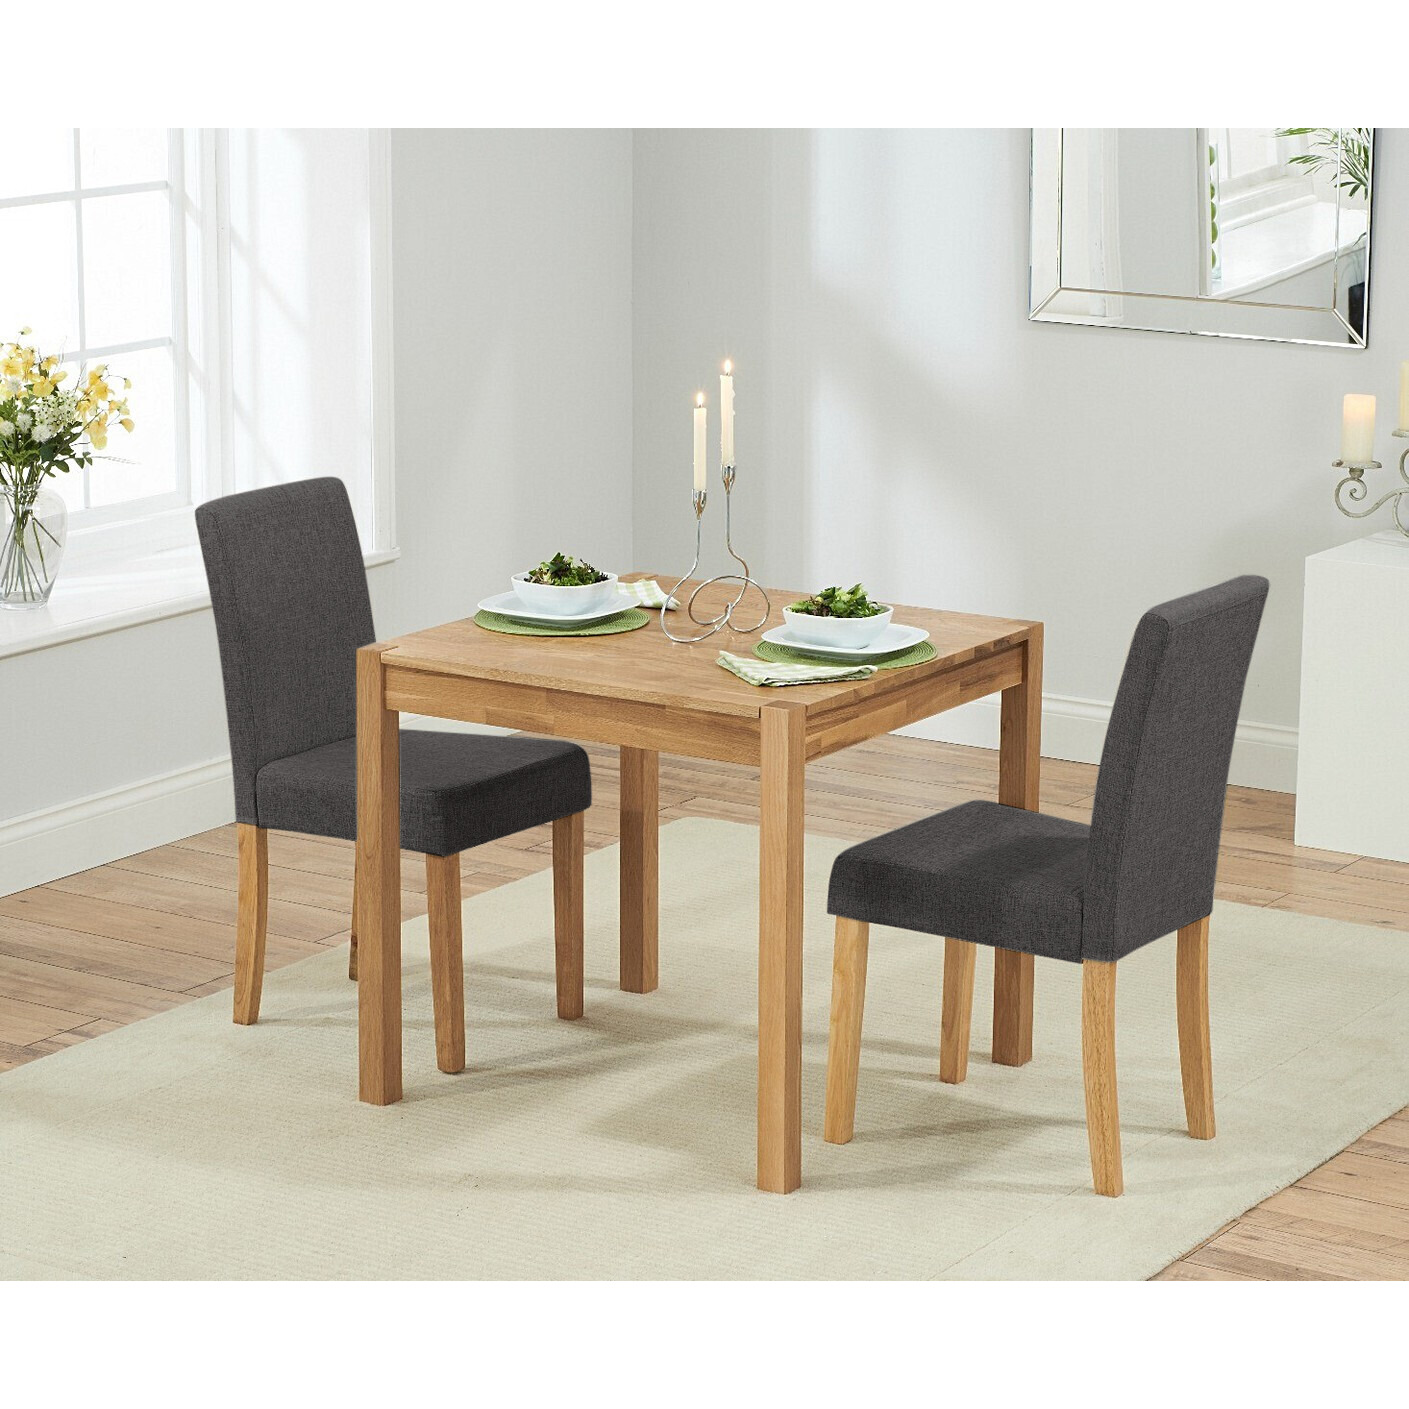 York 80cm Solid Oak Dining Table with 2 Natural Lila Chairs